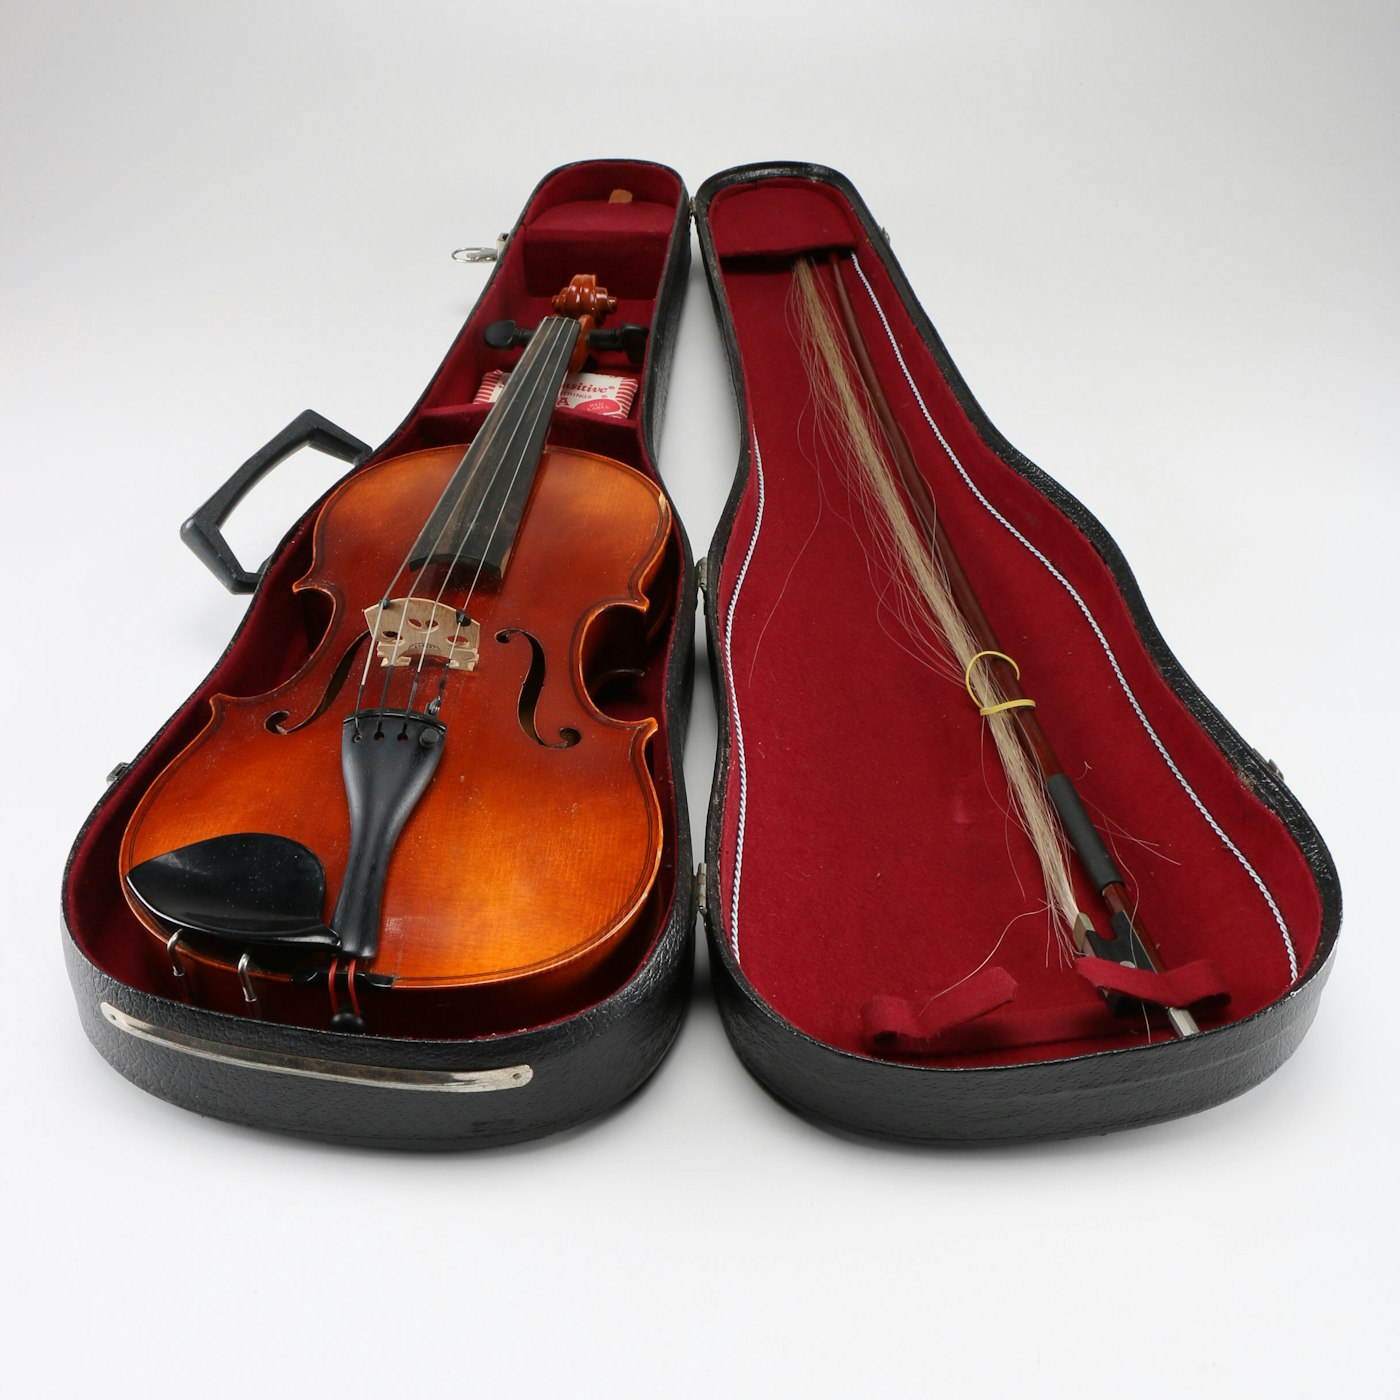 Karl Knilling Cello Serial Numbers